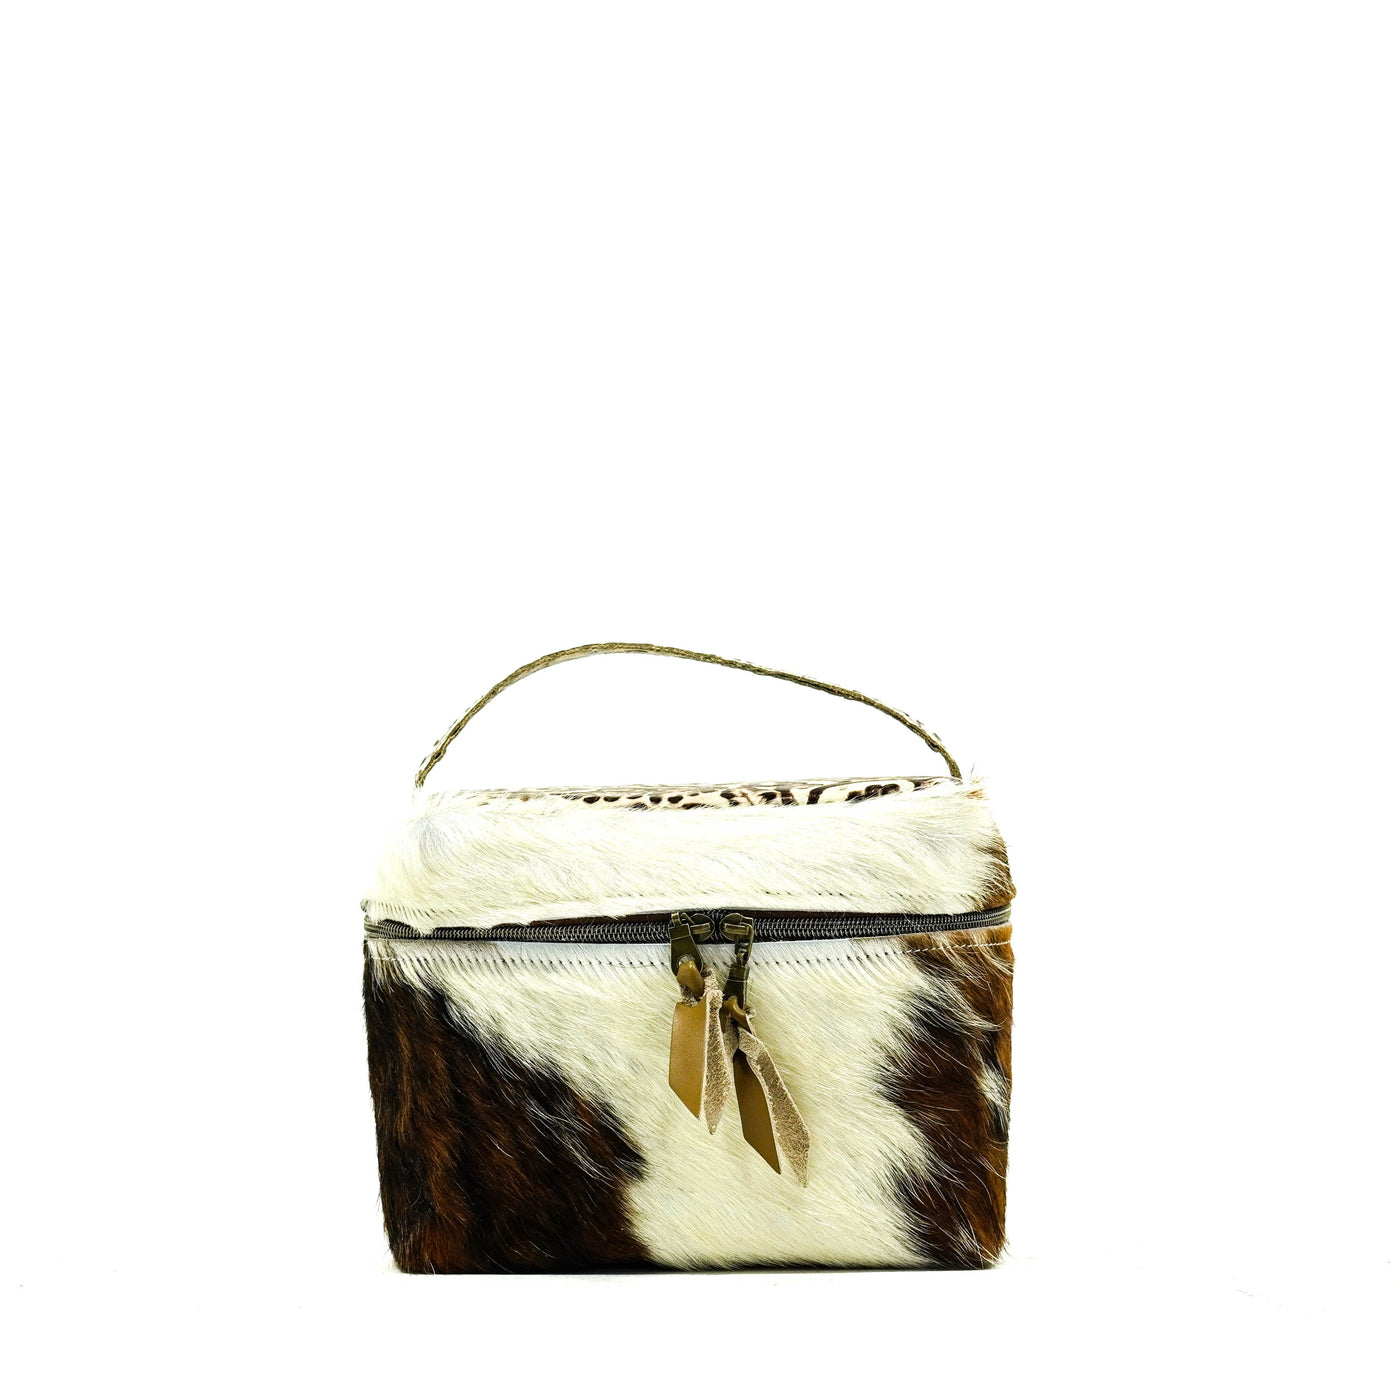 Caboose - Tricolor w/ Ivory Tool-Caboose-Western-Cowhide-Bags-Handmade-Products-Gifts-Dancing Cactus Designs